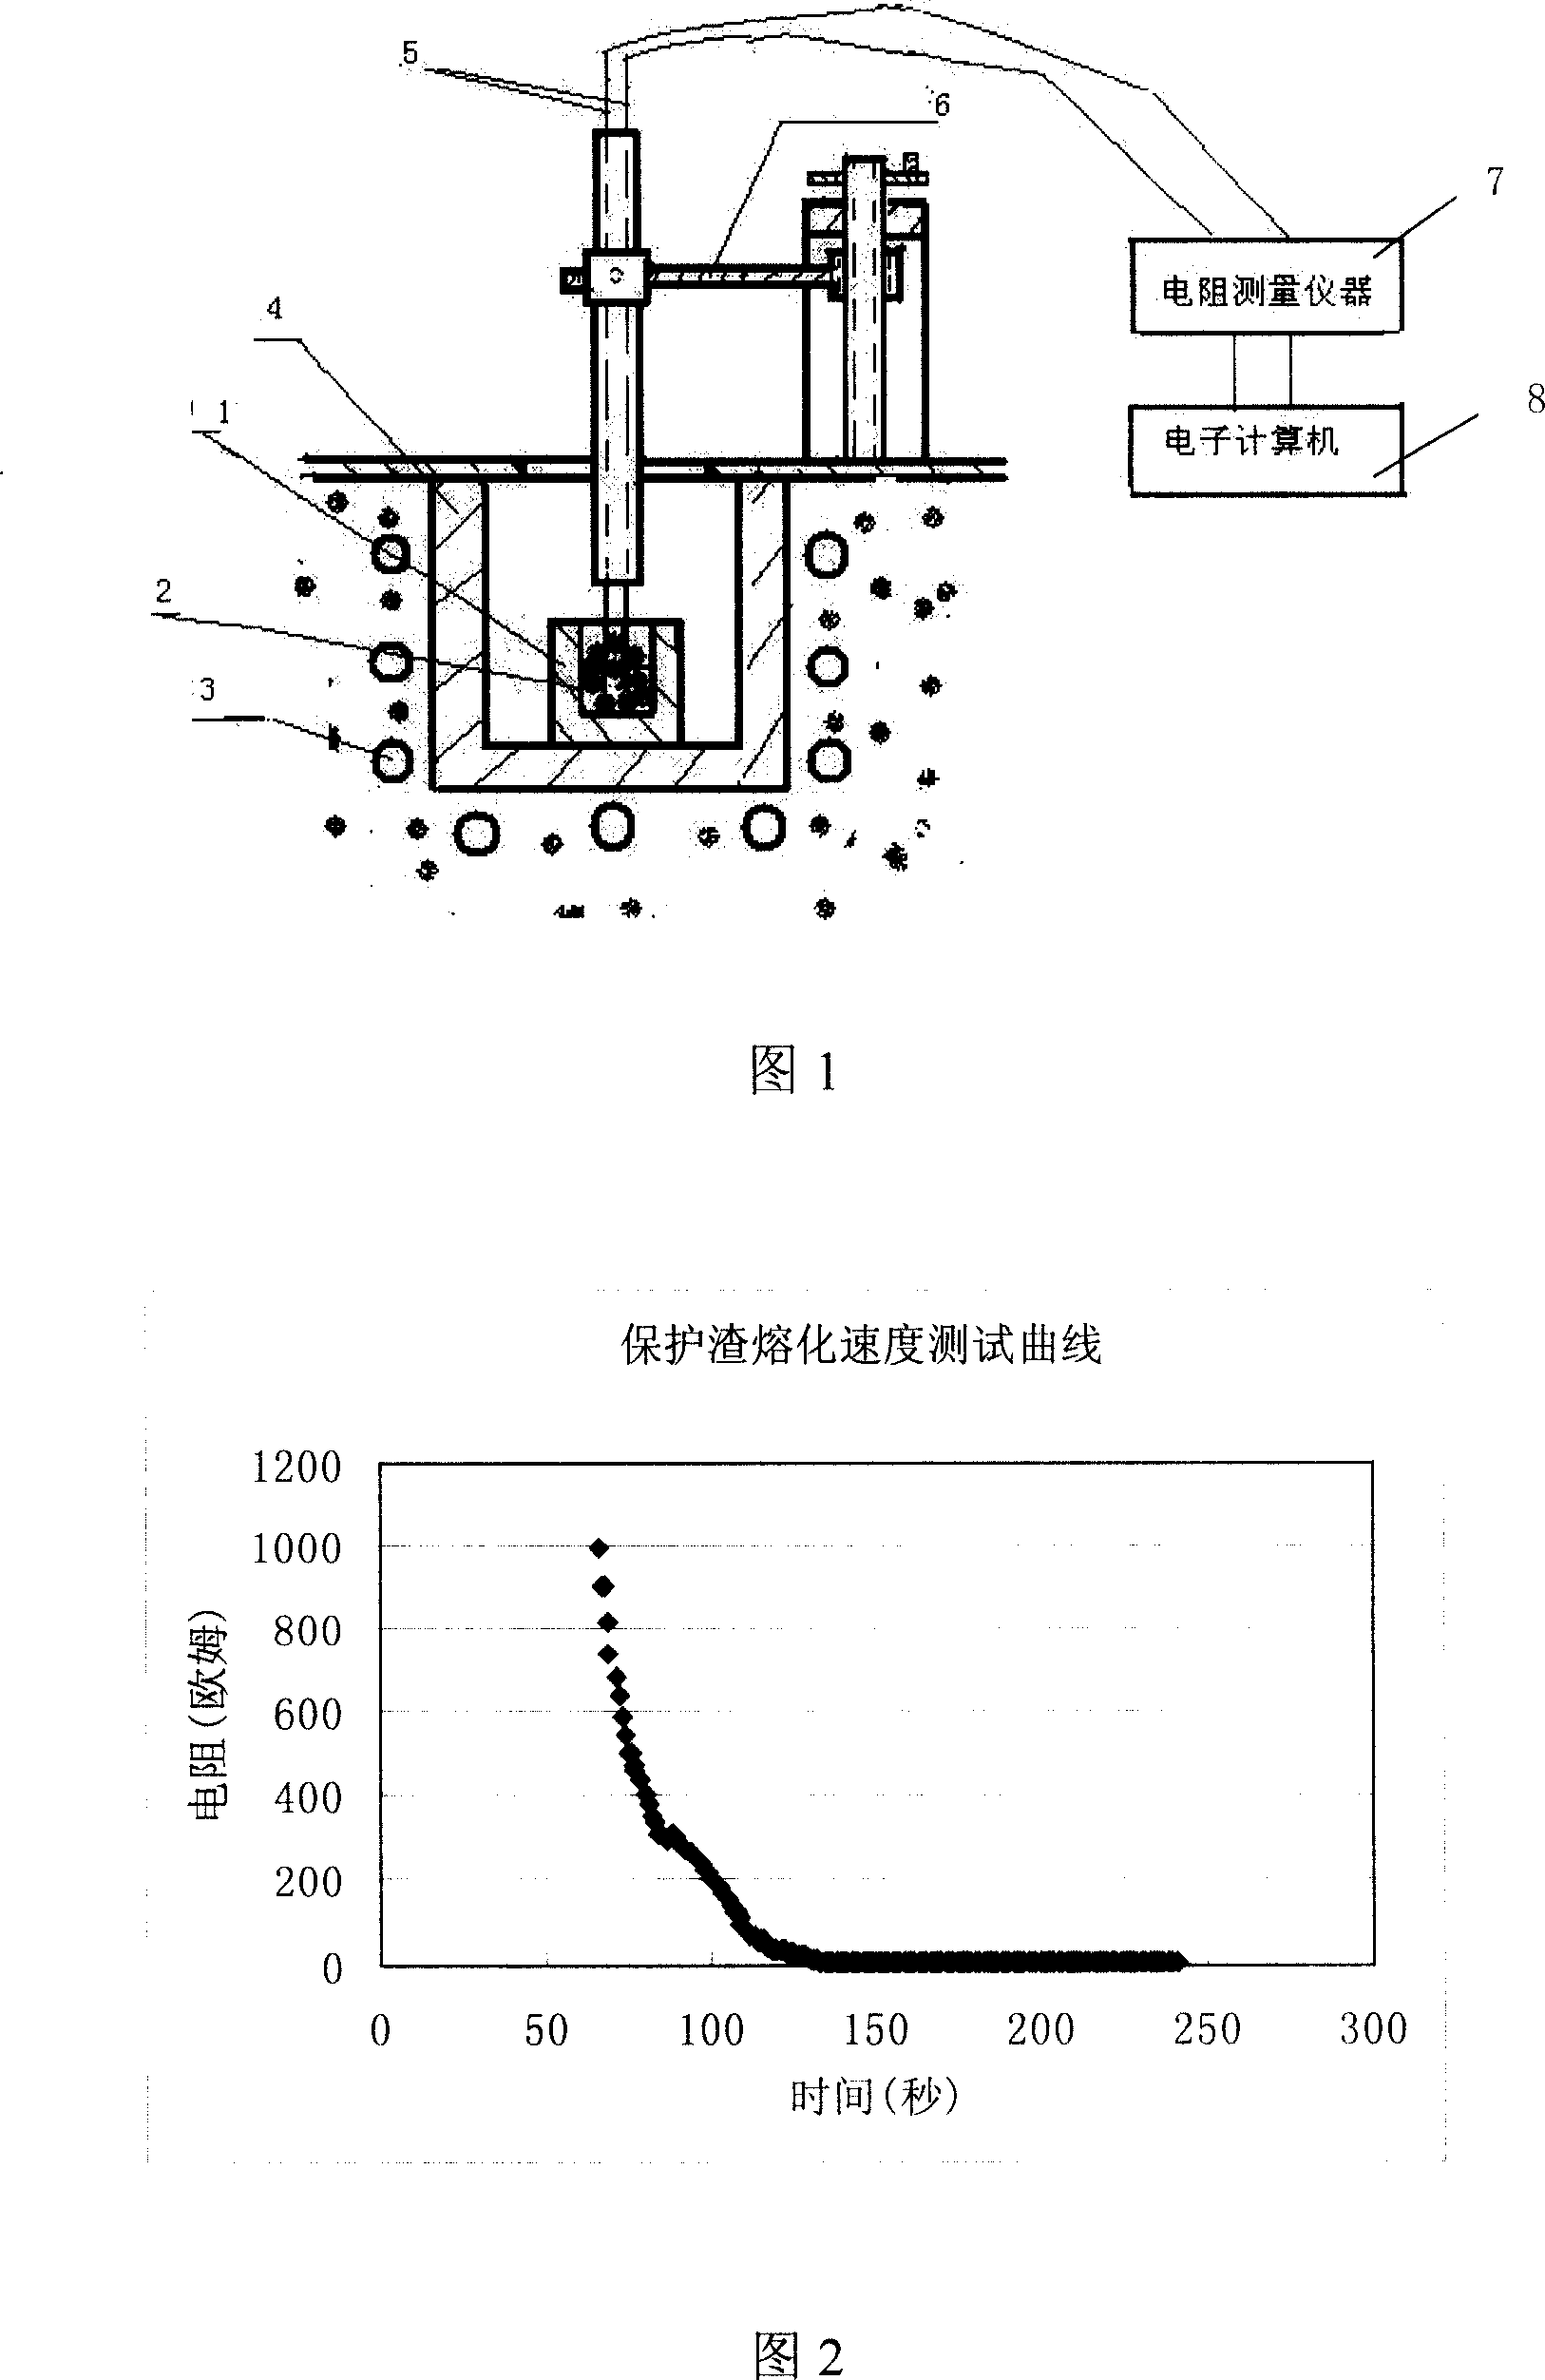 Method and device for mensurating speed of melting protecting slag